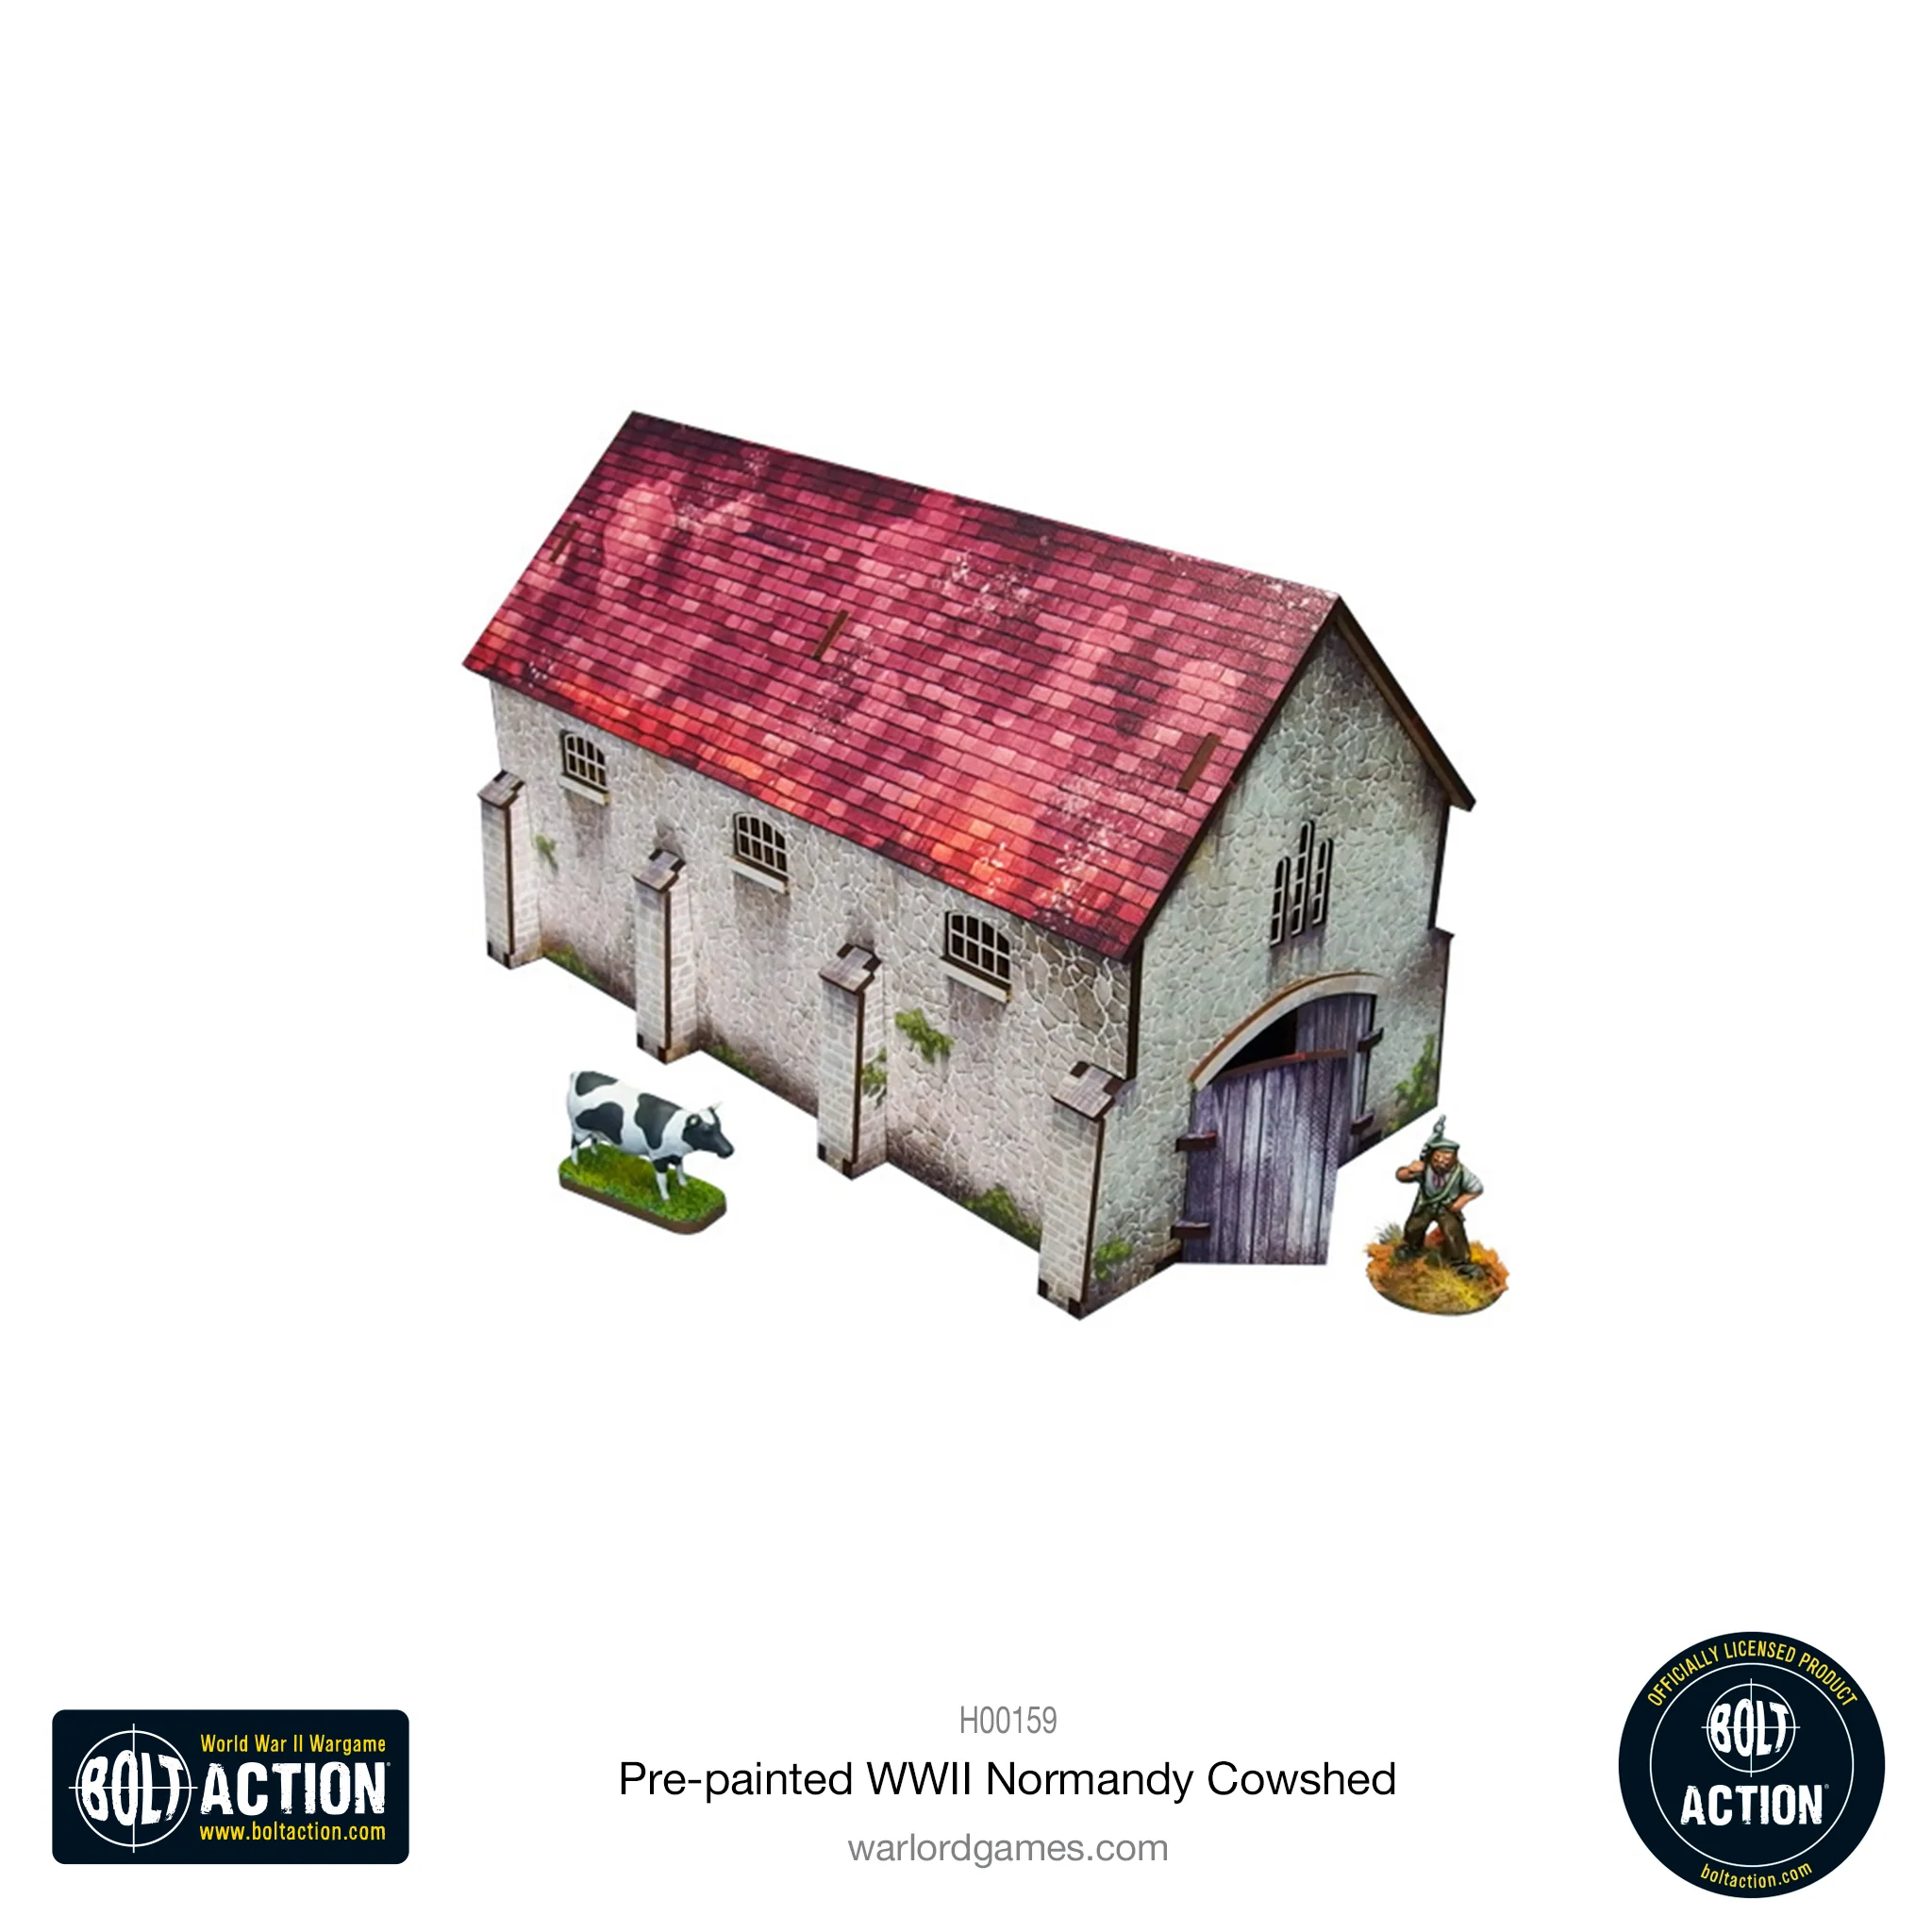 Bolt Action: Pre-painted WWII Normandy Cowshed-1711116070-77oFP.webp